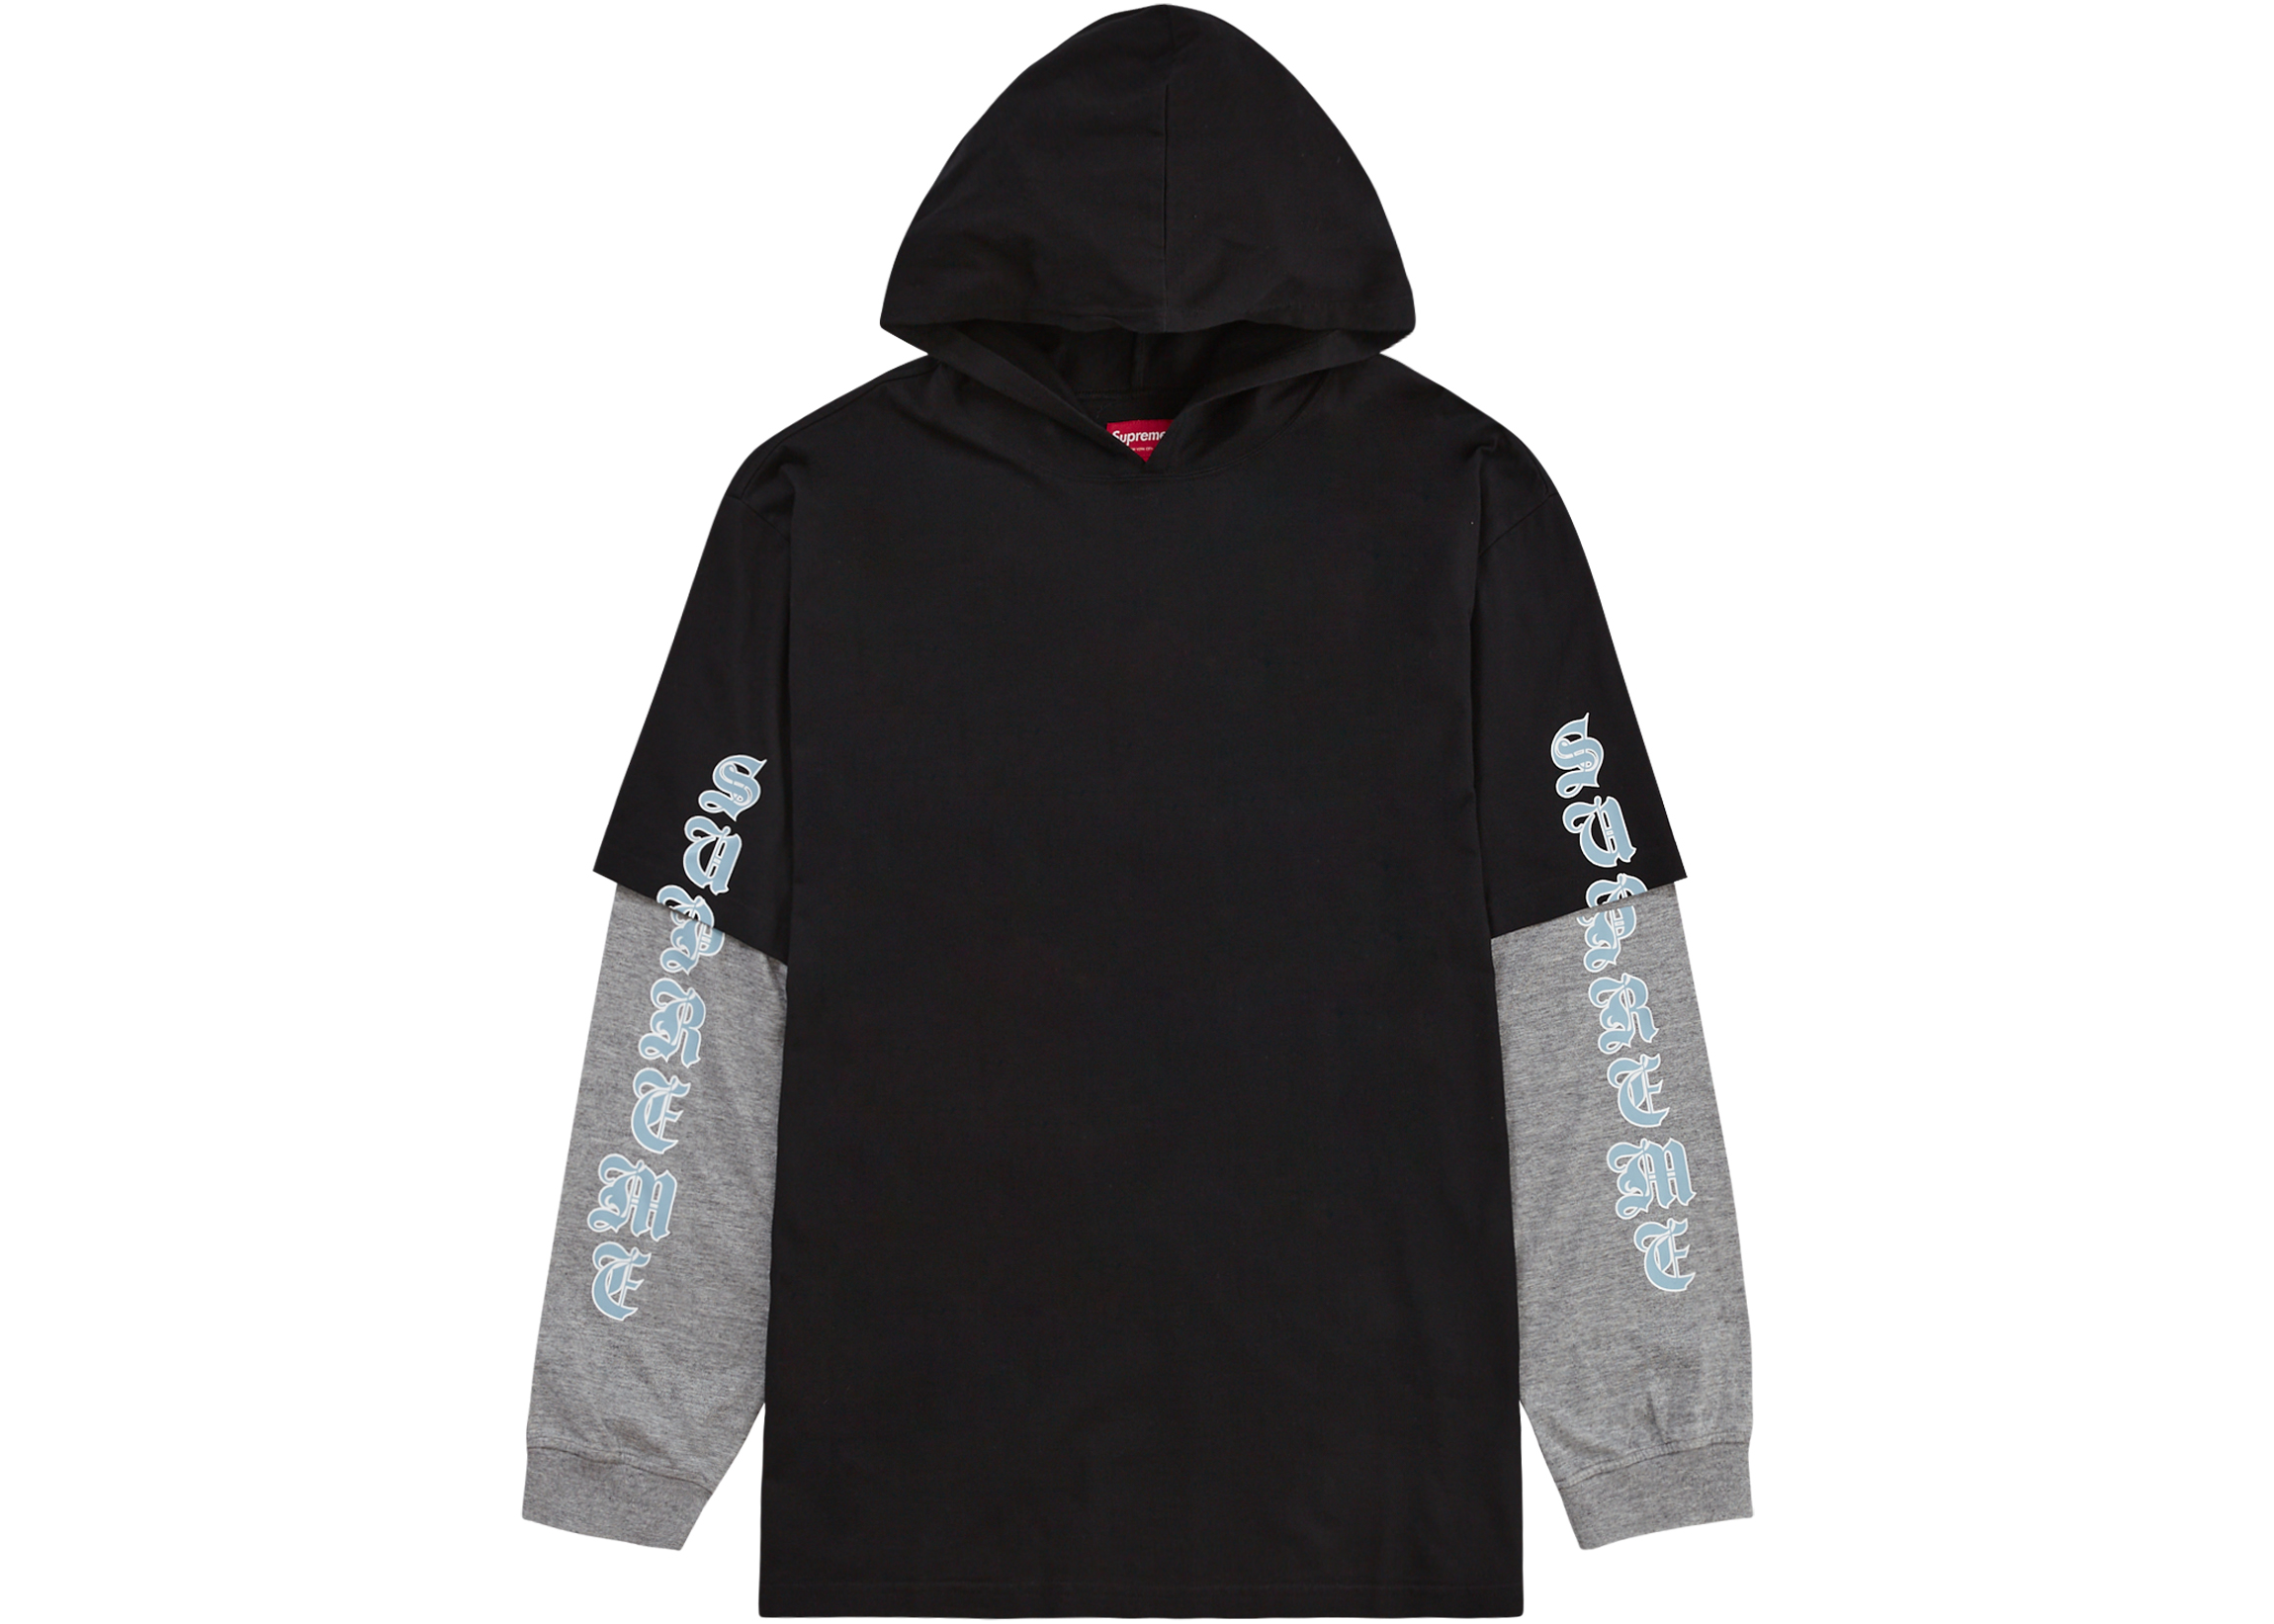 MotionlogoSupreme Layered Hooded L/S Top \